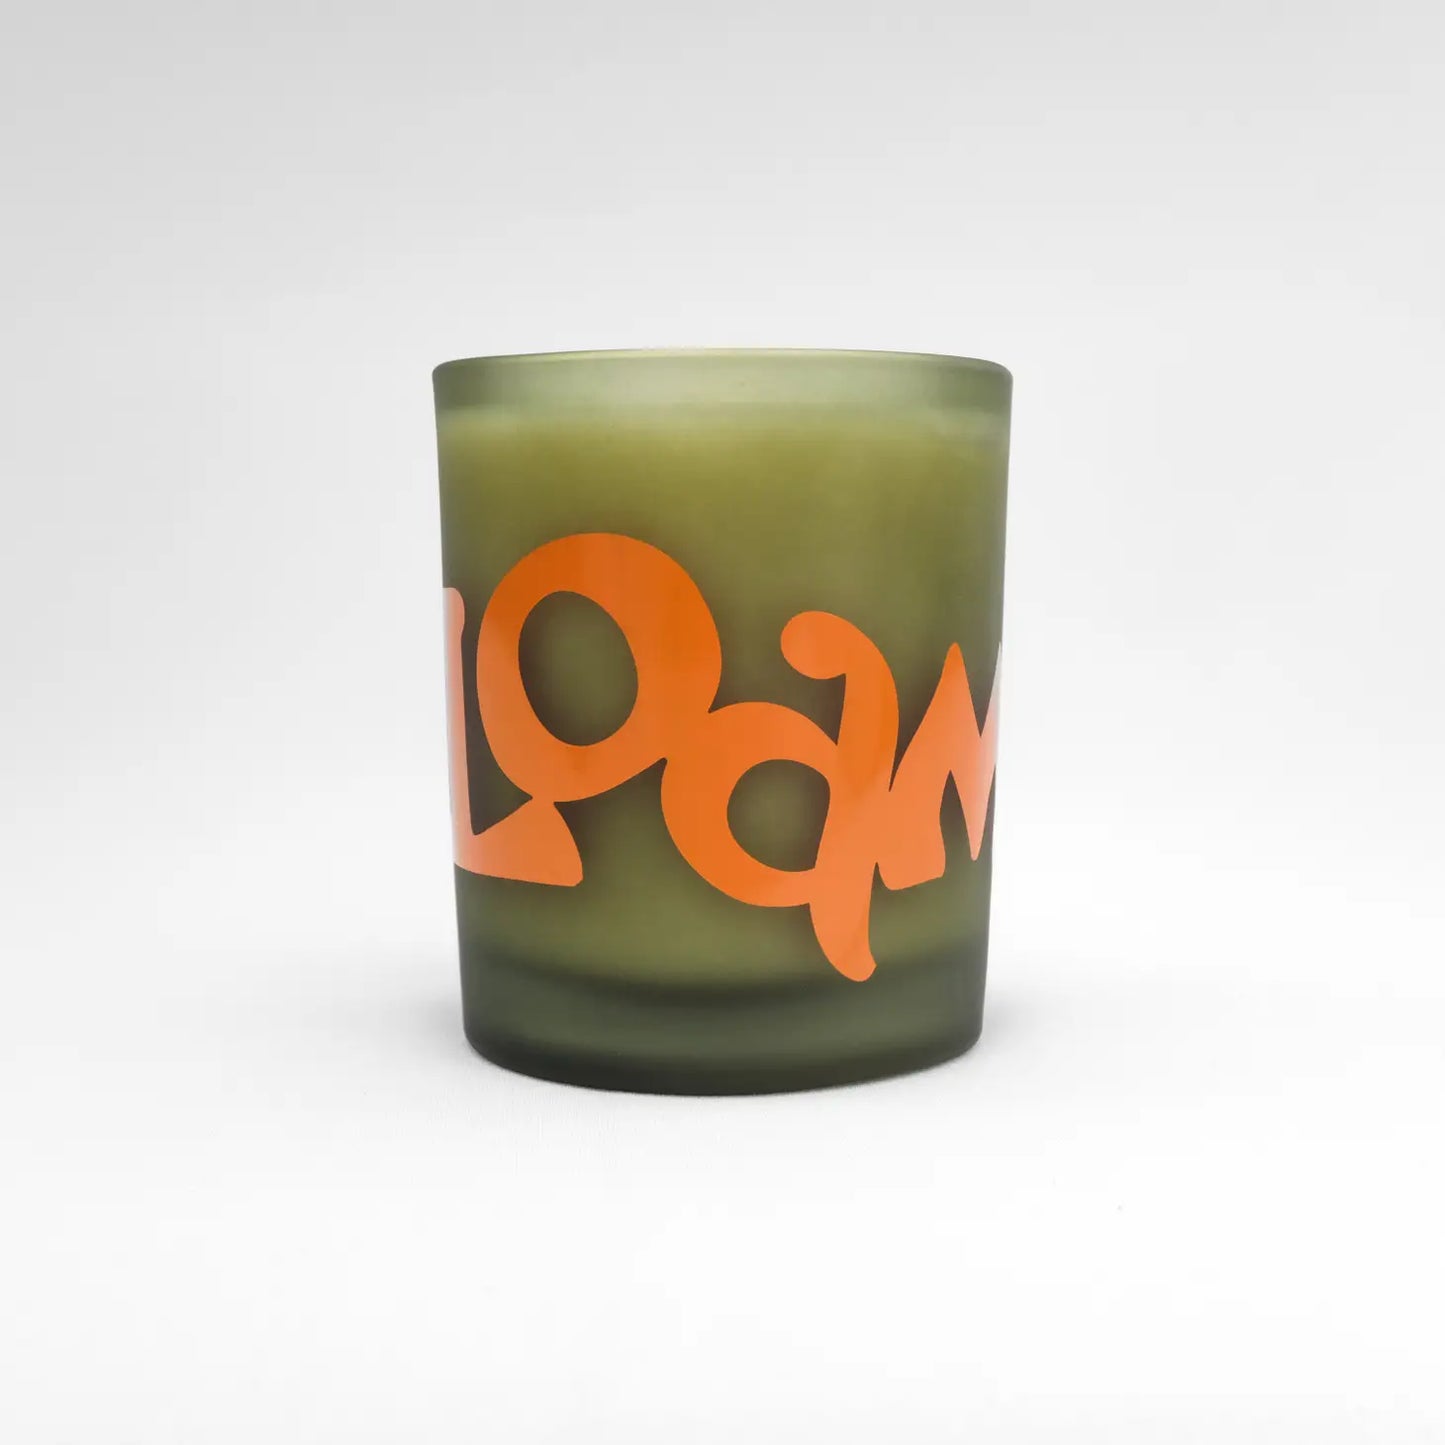 Loam’s Community Garden Candle